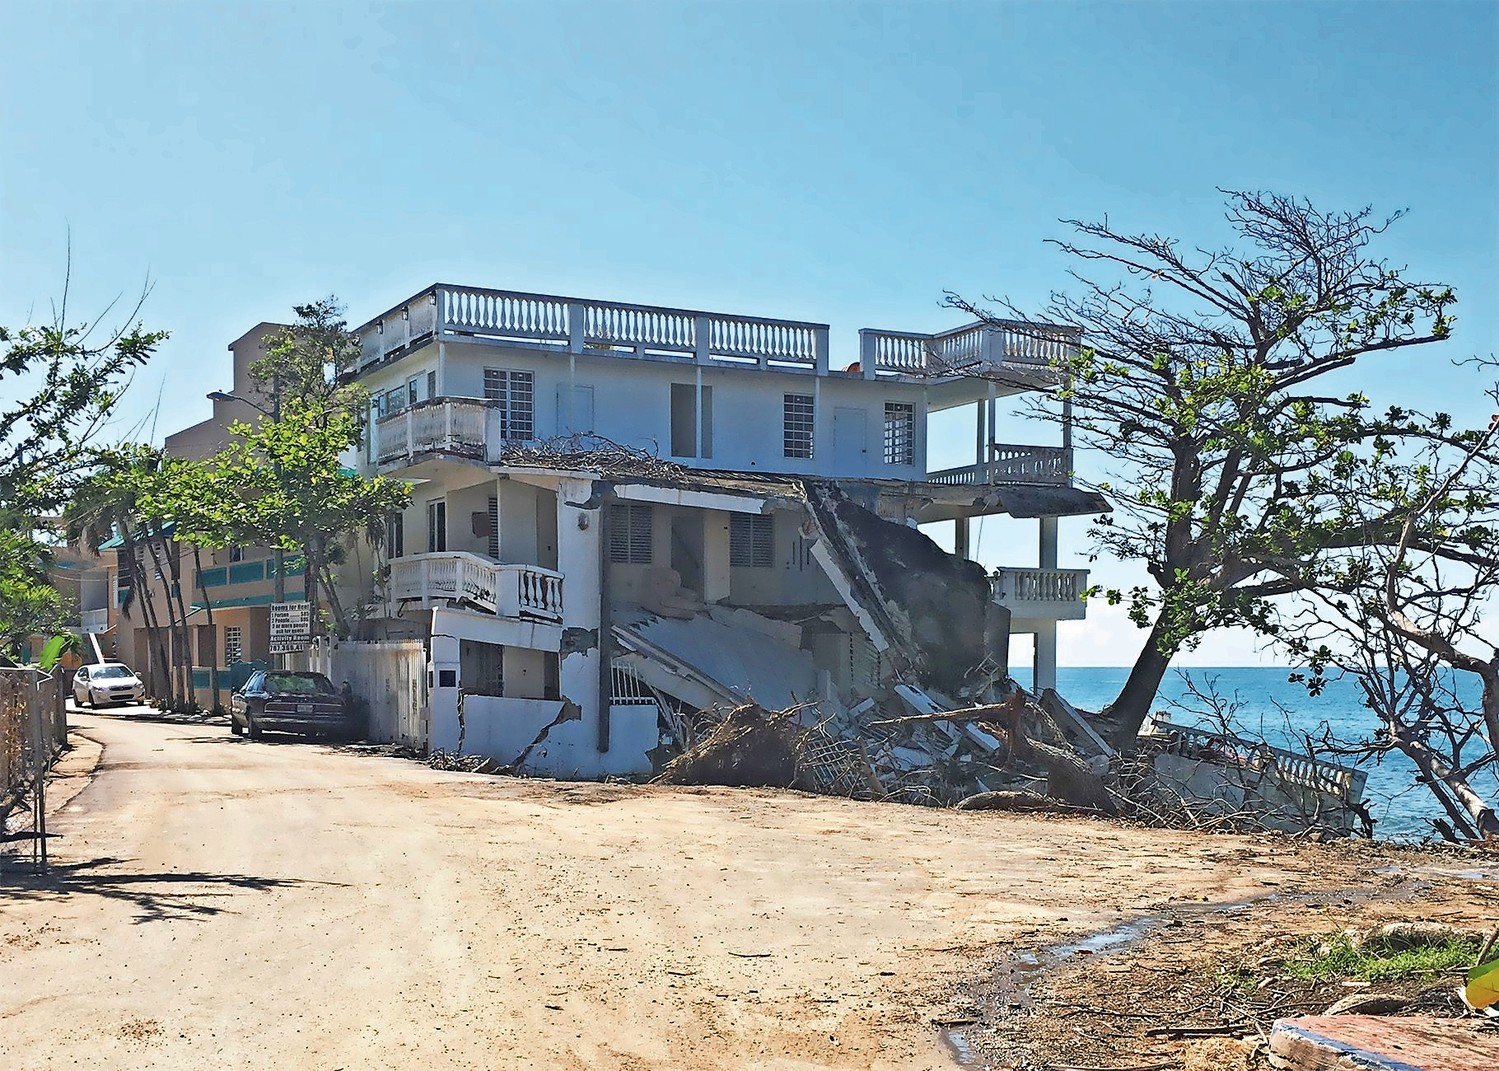 Post-hurricane Damage in Puerto Rico was extensive.